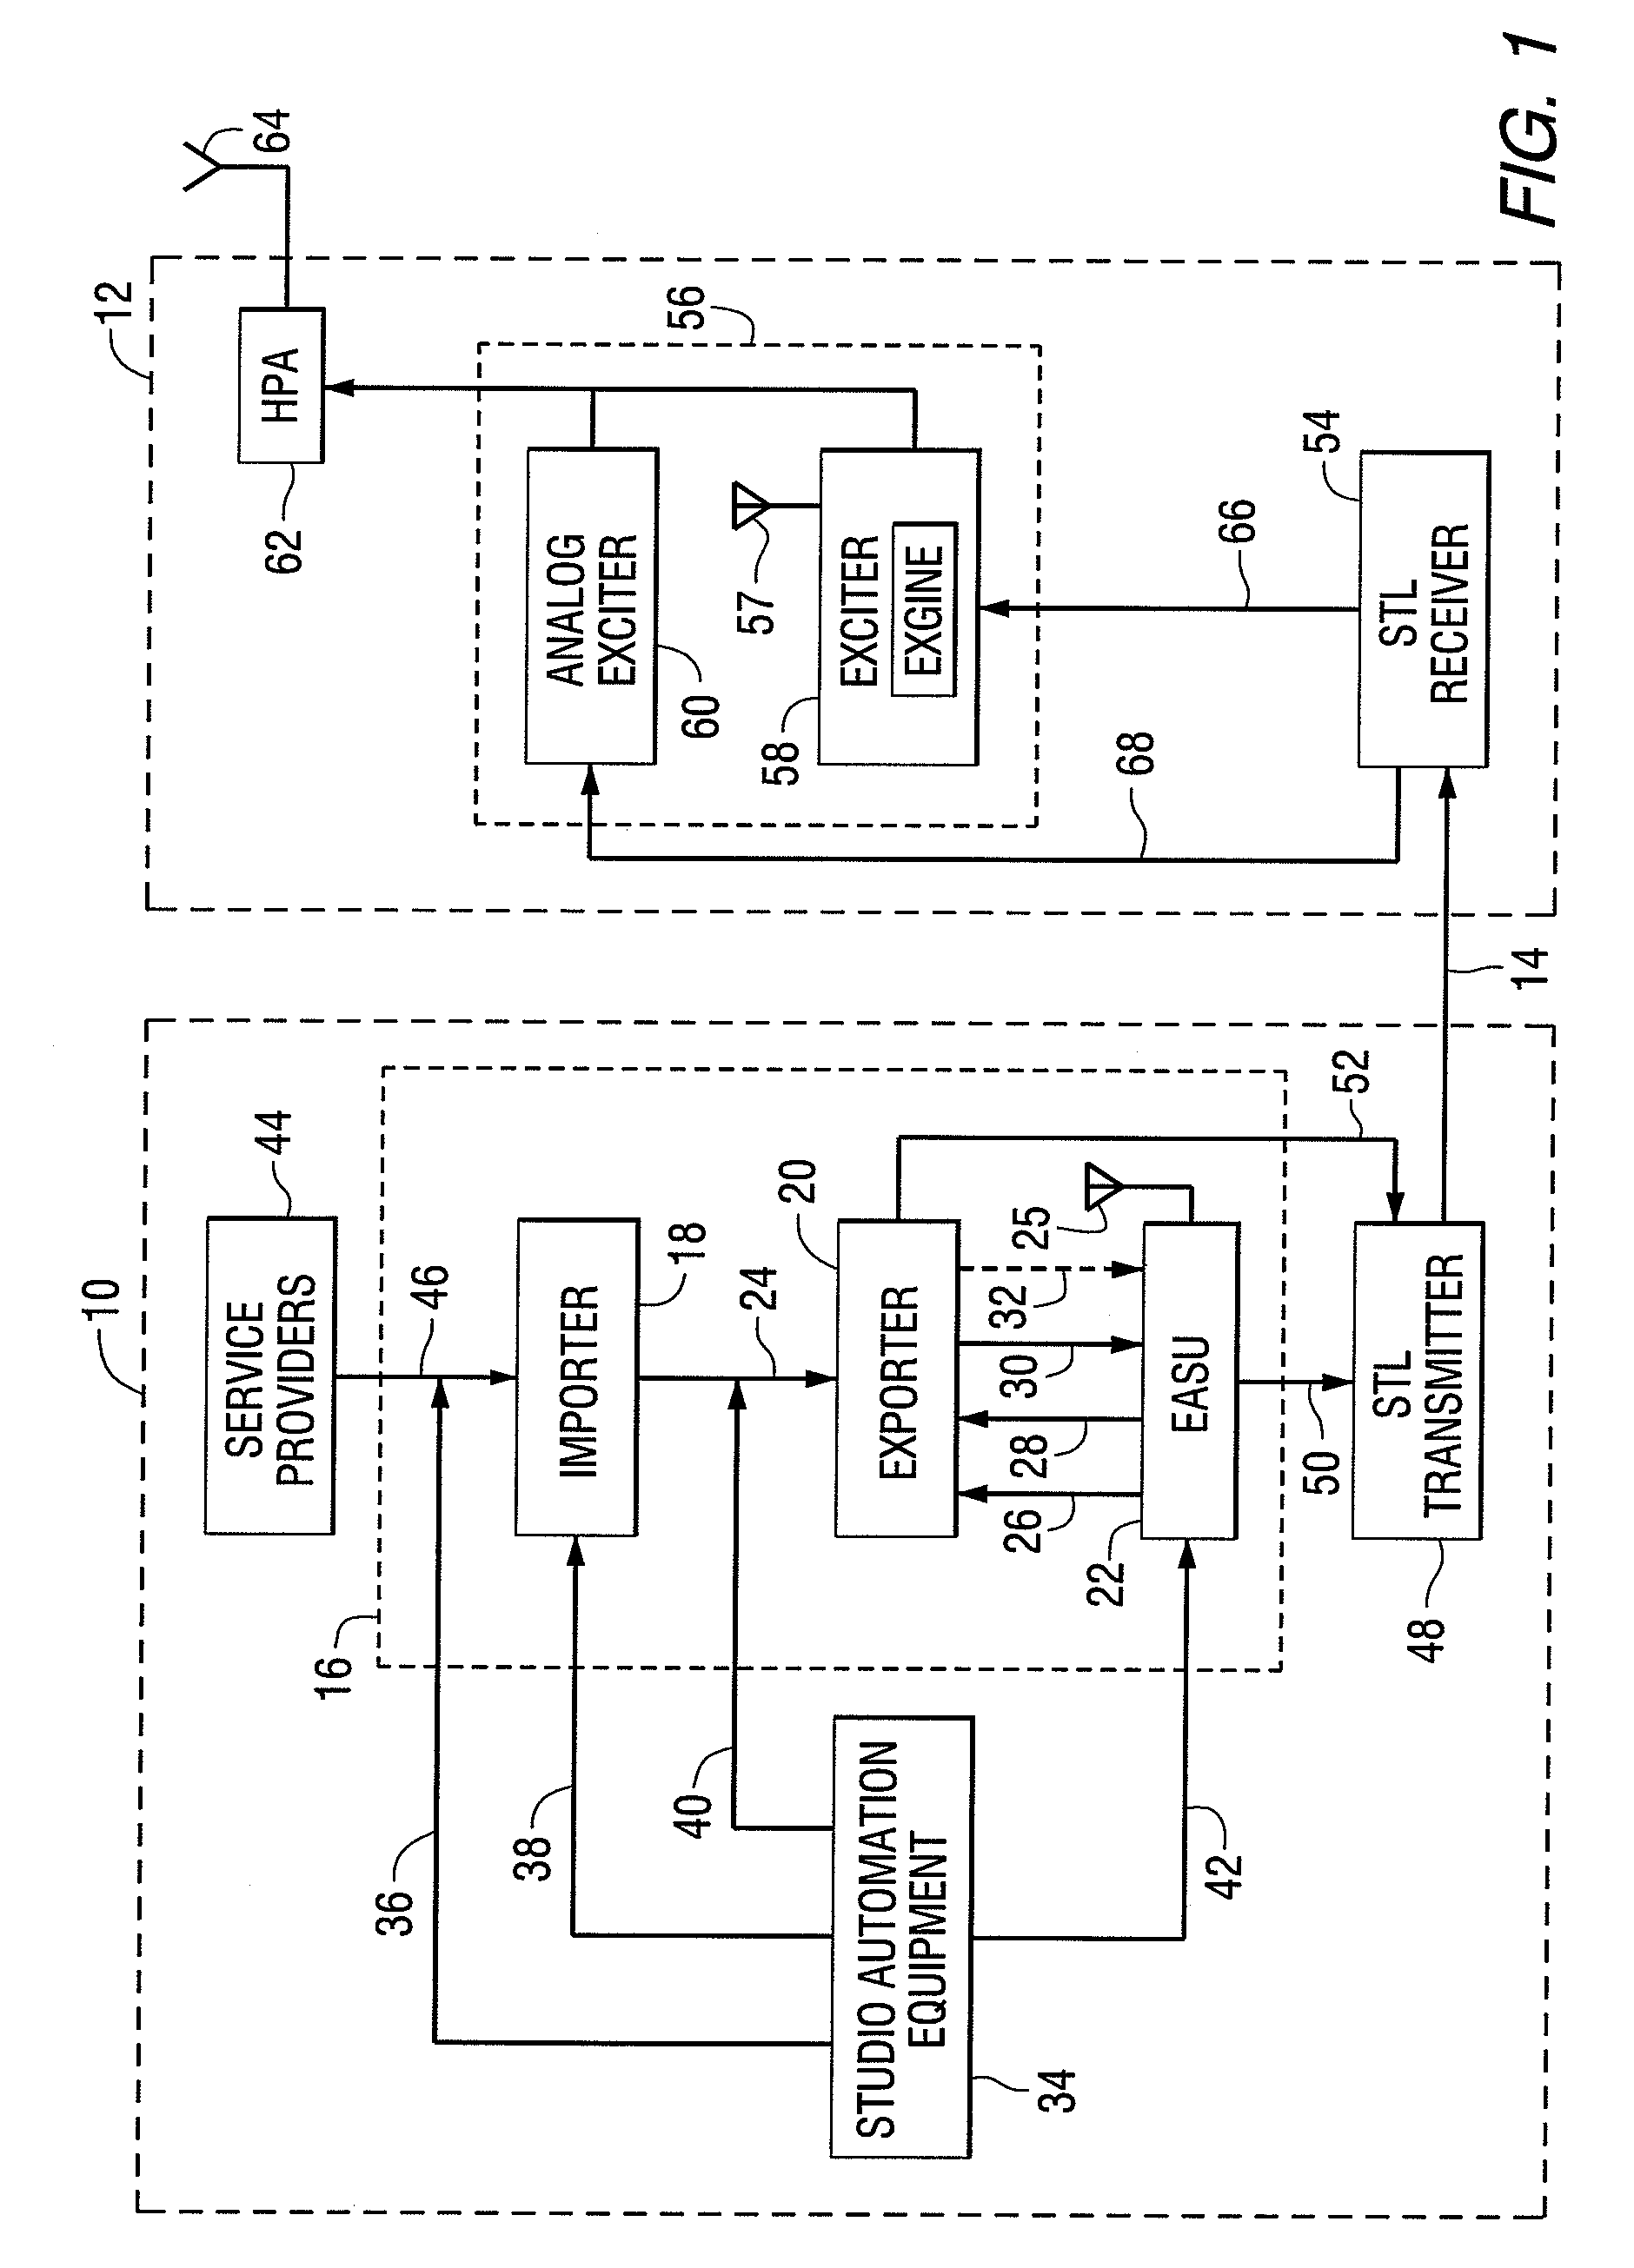 Method and Apparatus for Implementing Seek and Scan Functions for an FM Digital Radio Signal